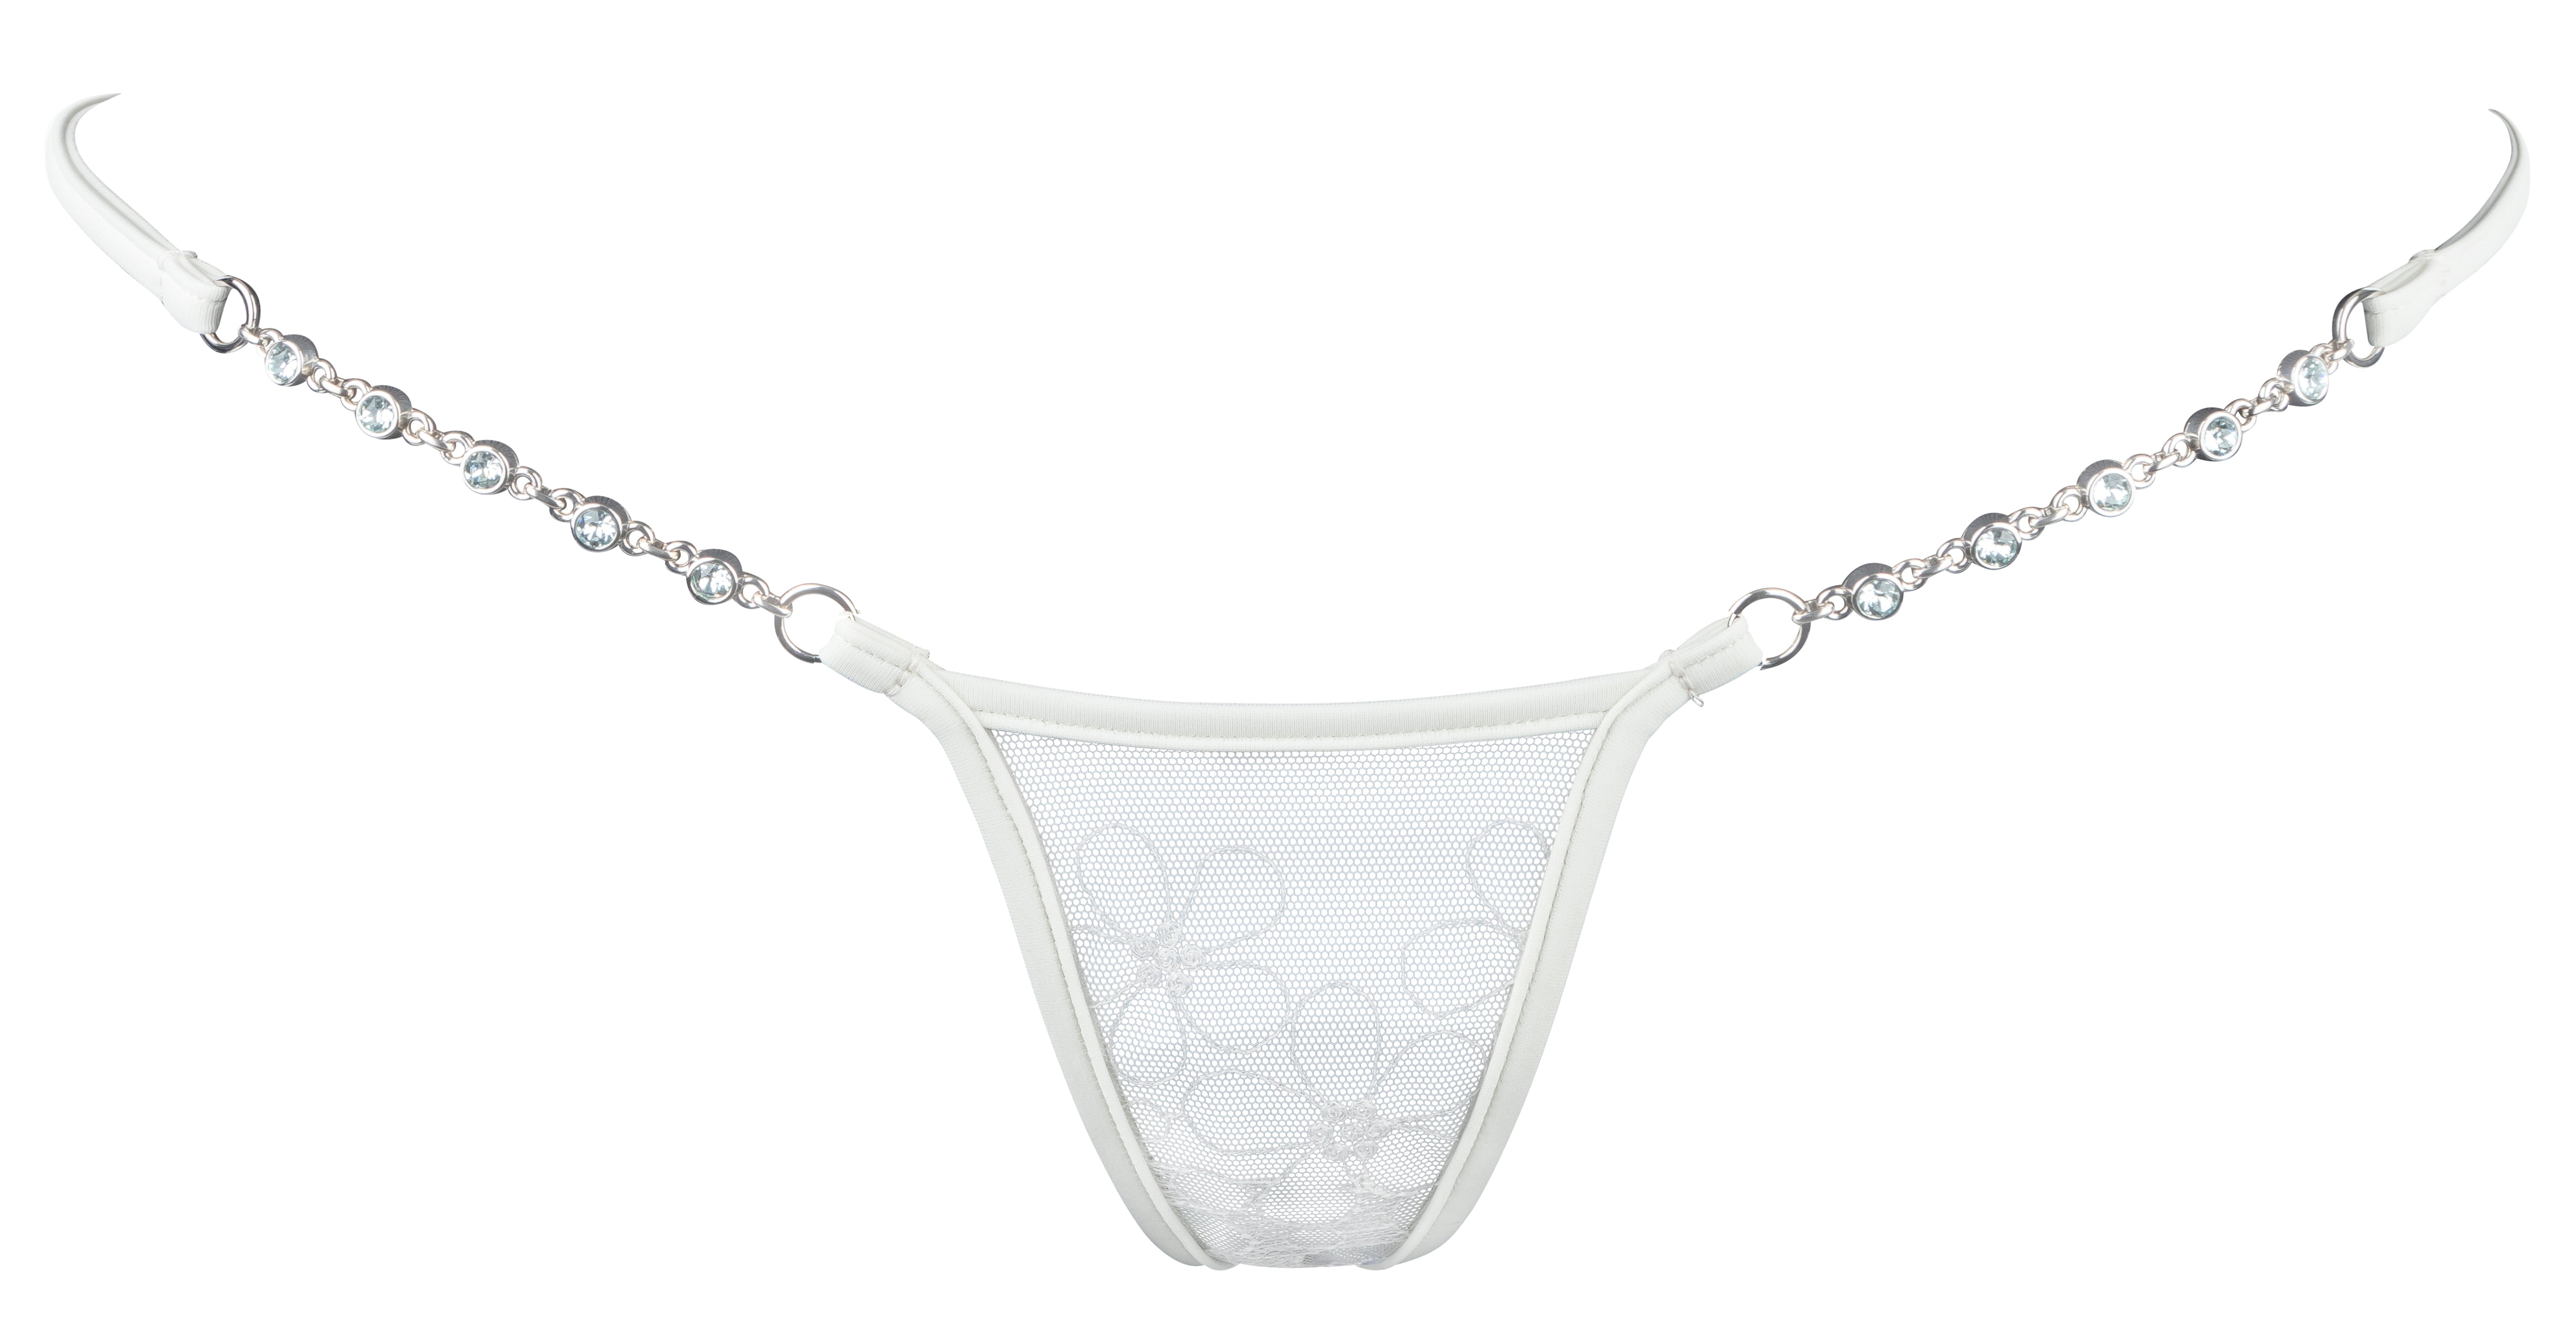 Pearl Crotchless Panties Crotchless G String With Swarovski